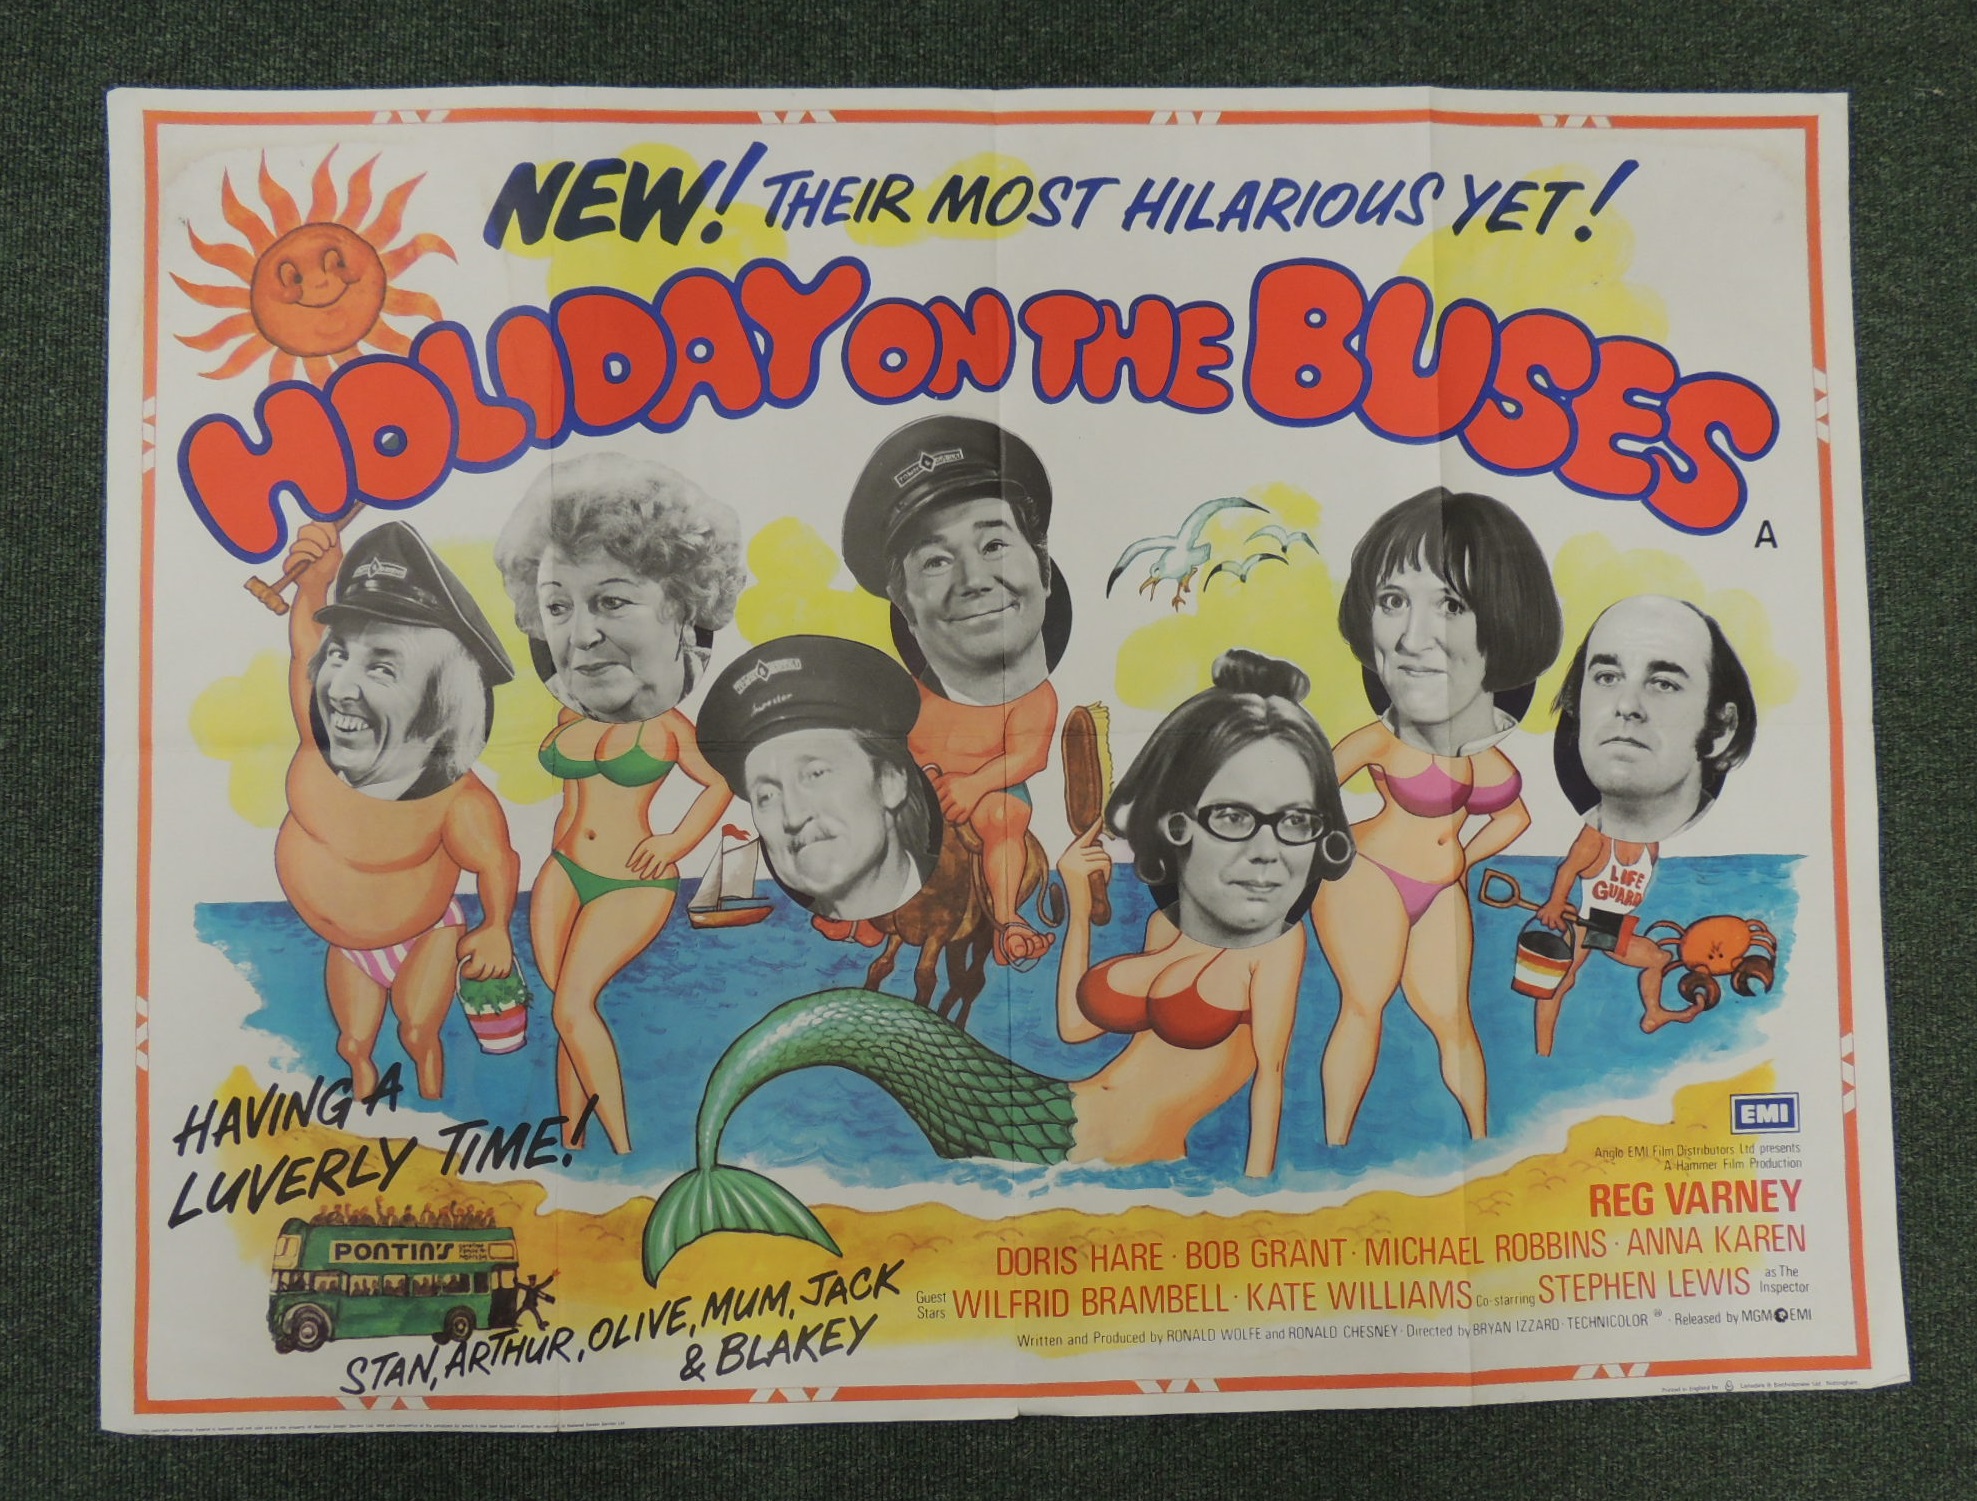 Original British quad film posters - Holiday on the Buses starring Reg Varney (small edge tears) and